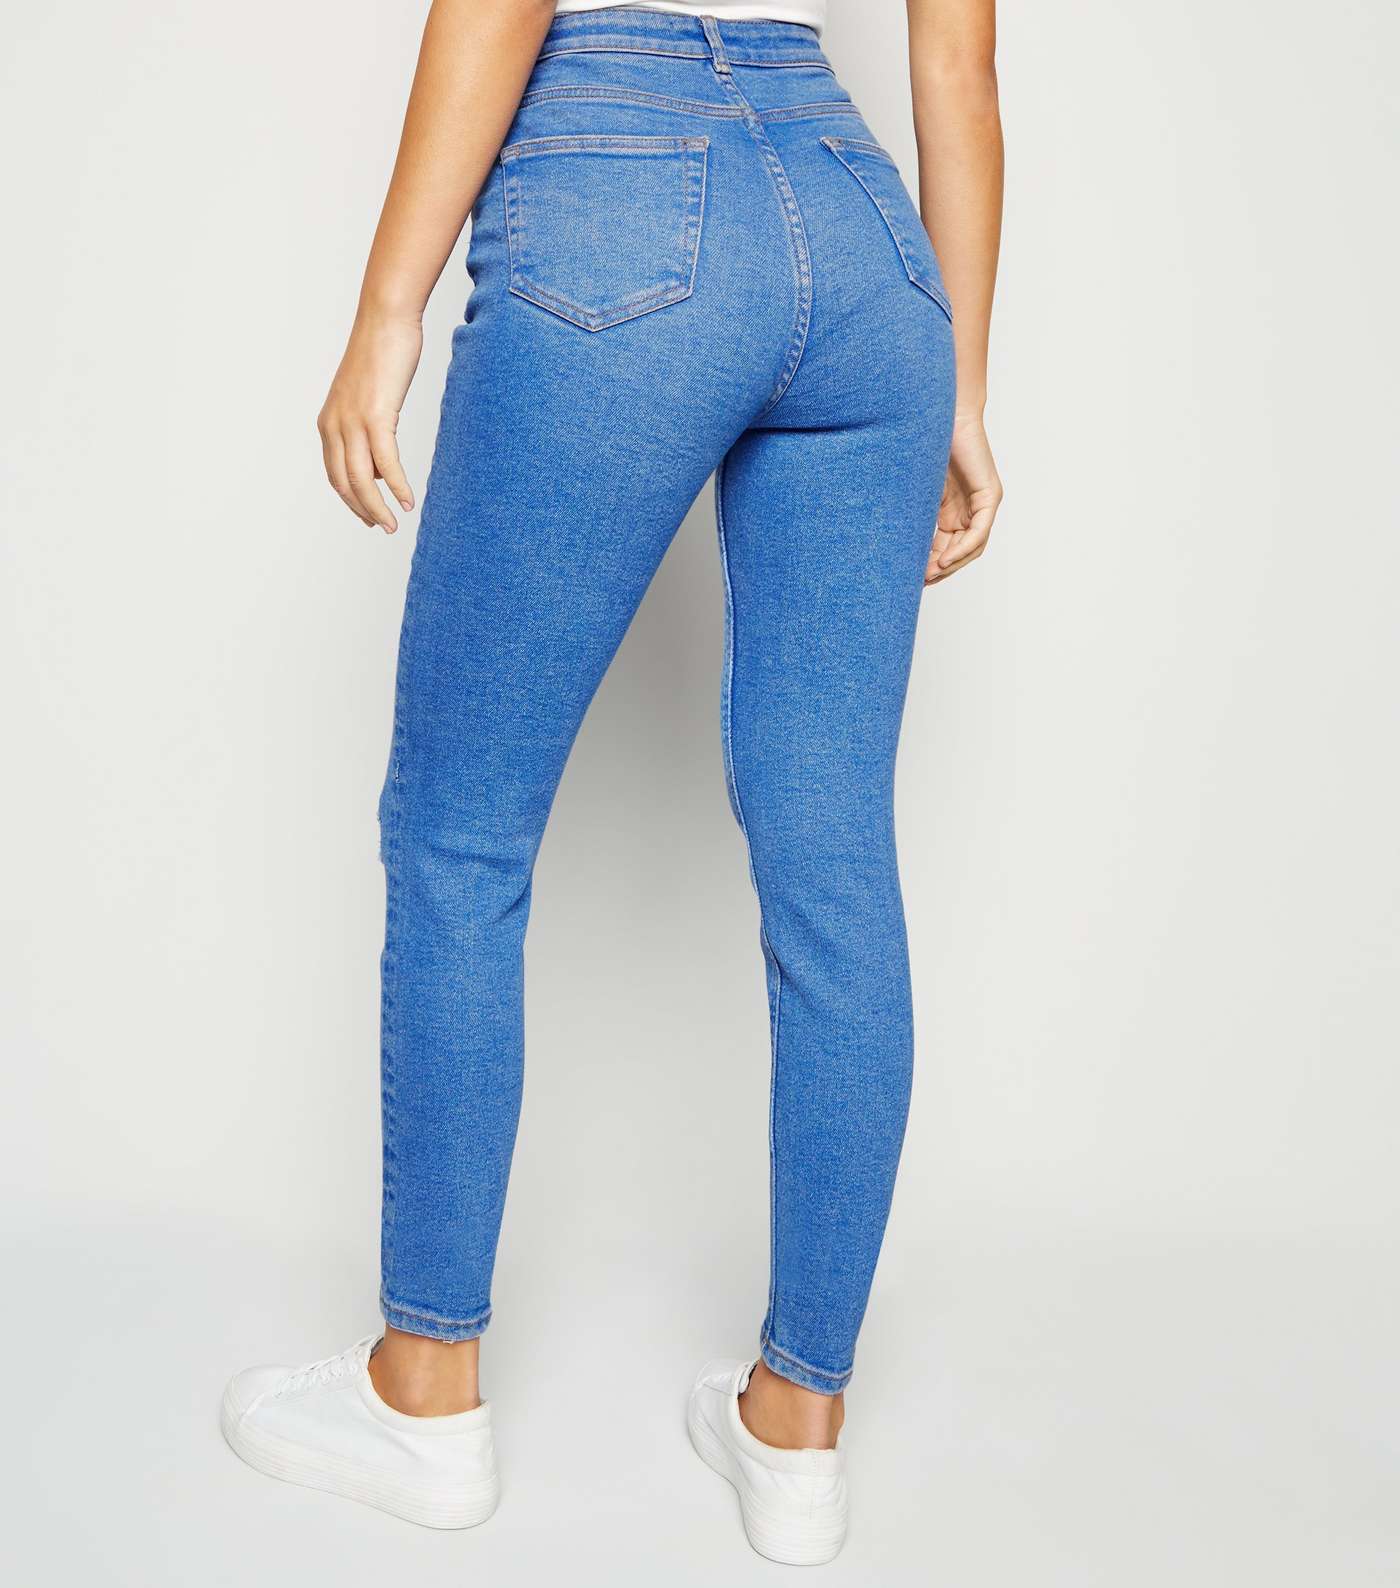 Bright Blue Ripped Super Skinny Hallie Jeans Image 3